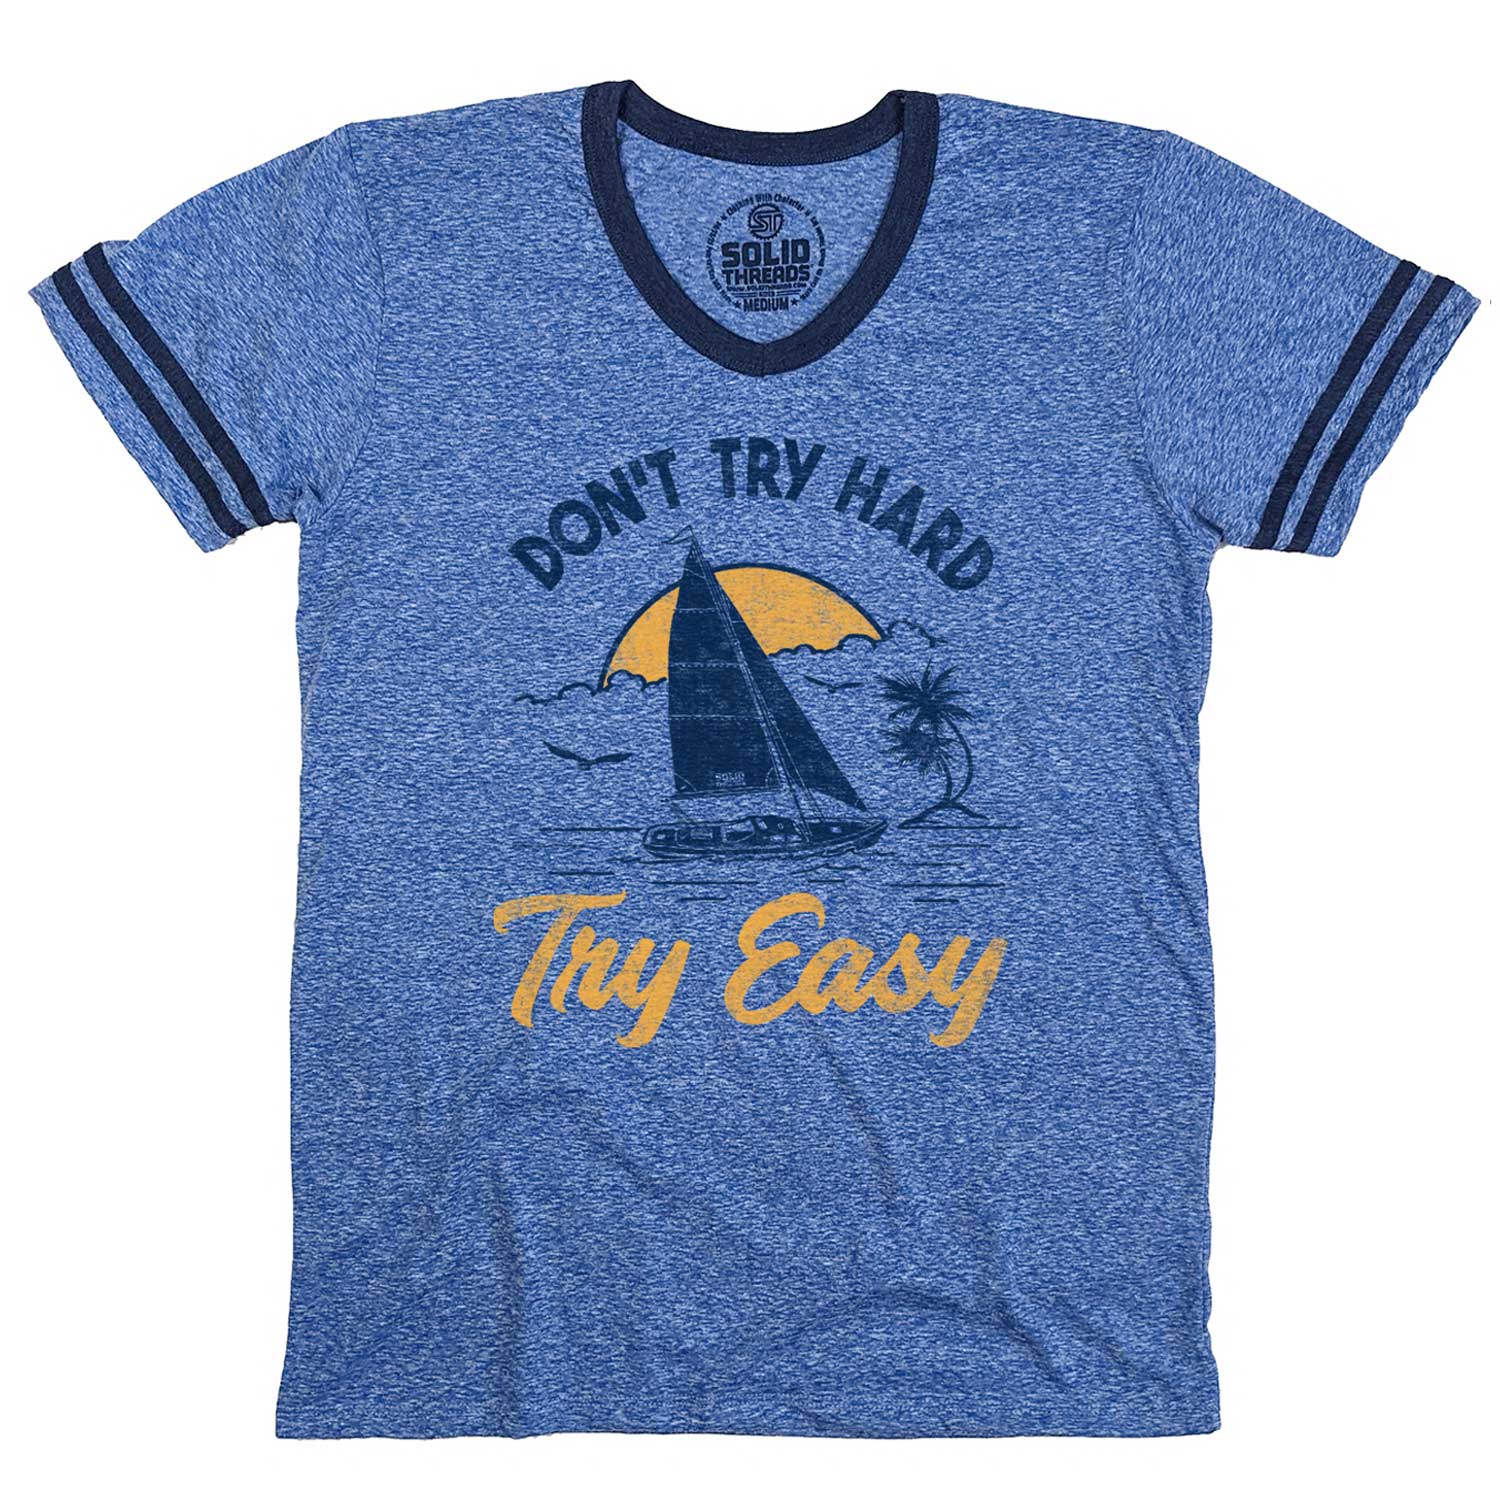 Men's Don't Try Hard Try Easy Vintage Graphic V-Neck Tee | Cool Sailboat T-shirt | Solid Threads